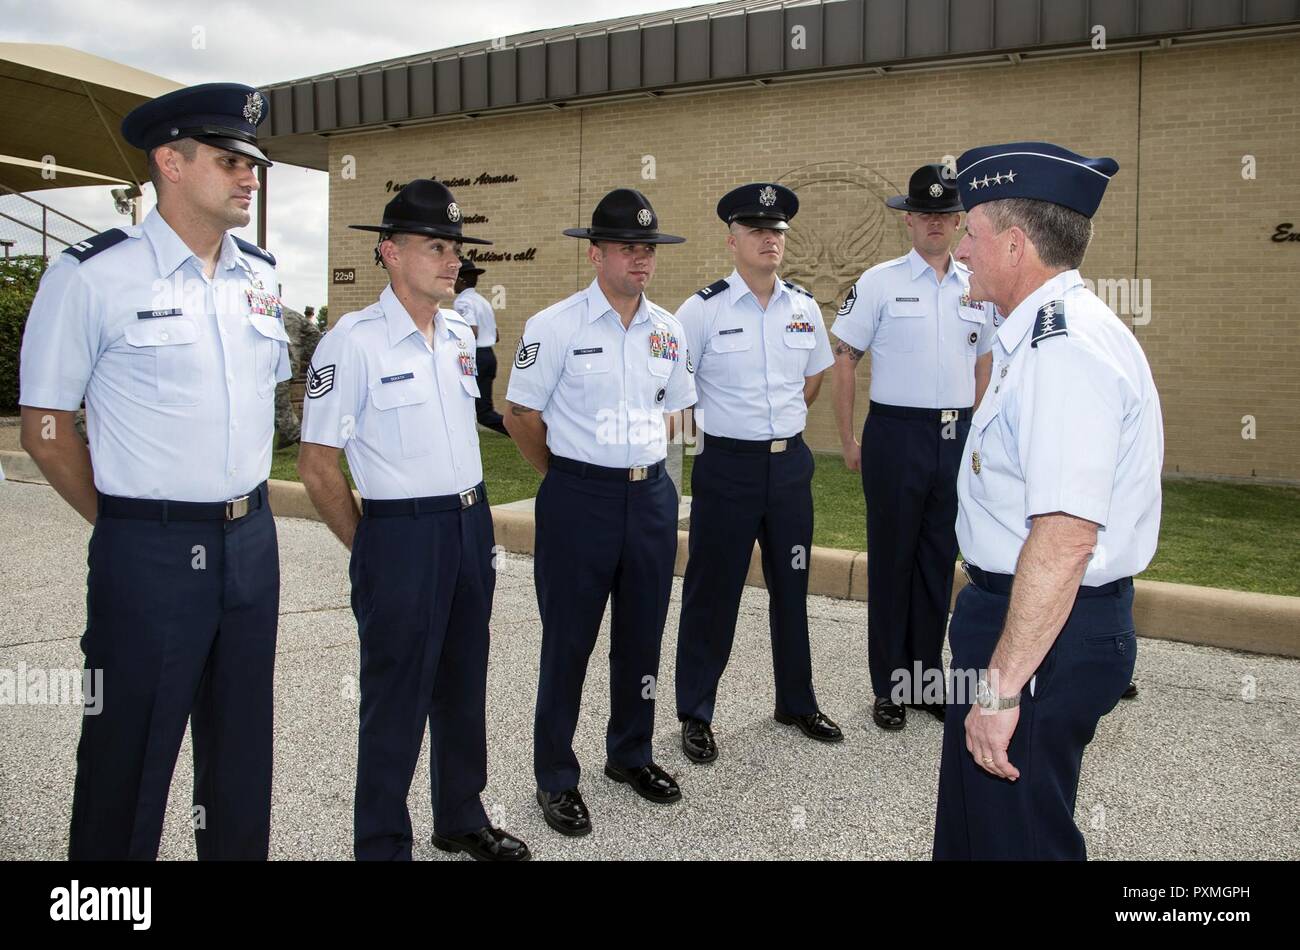 Air Force Chief of Staff Gen. David Goldfein speaks with military training instructors after a basic military training graduation June 16, 2017, at Joint Base San Antonio-Lackland, Texas. Goldfein toured various JBSA-Lackland facilities and met many 37th Training Wing Airmen during his two-day visit. Every enlisted Airmen begins their Air Force career at basic military training. JBSA-Lackland is often referred to as the 'Gateway to the Air Force,' graduating about 39,000 Airmen annually. BMT is one of the missions of the 37th Training Wing, the largest training wing in the United States Air Fo Stock Photo